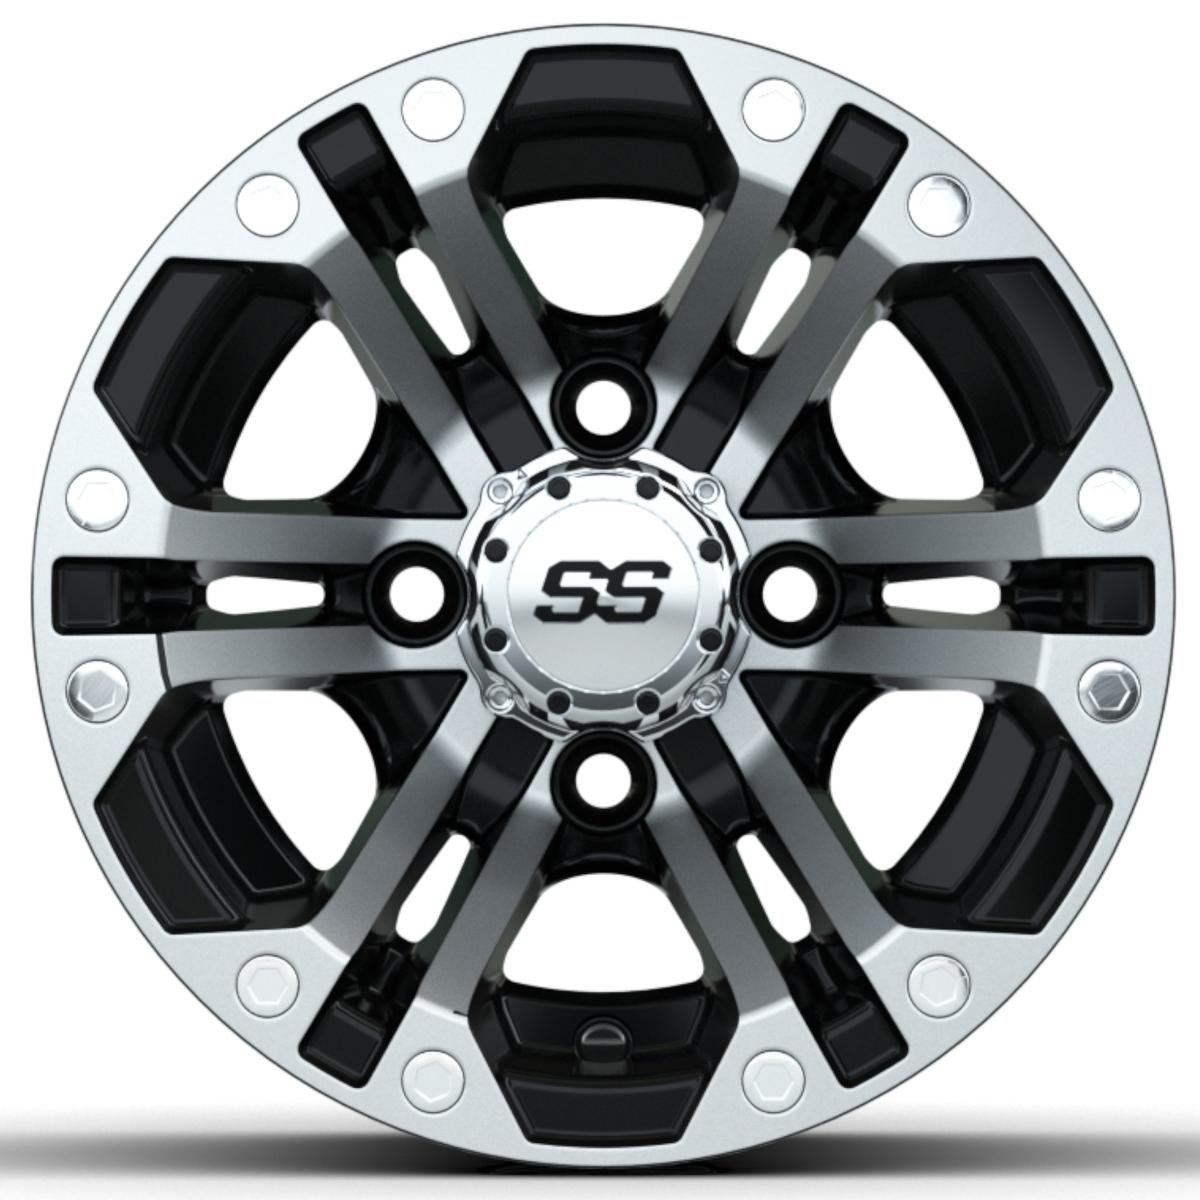 10&Prime; GTW&reg; Specter Black with Machined Accents Wheel